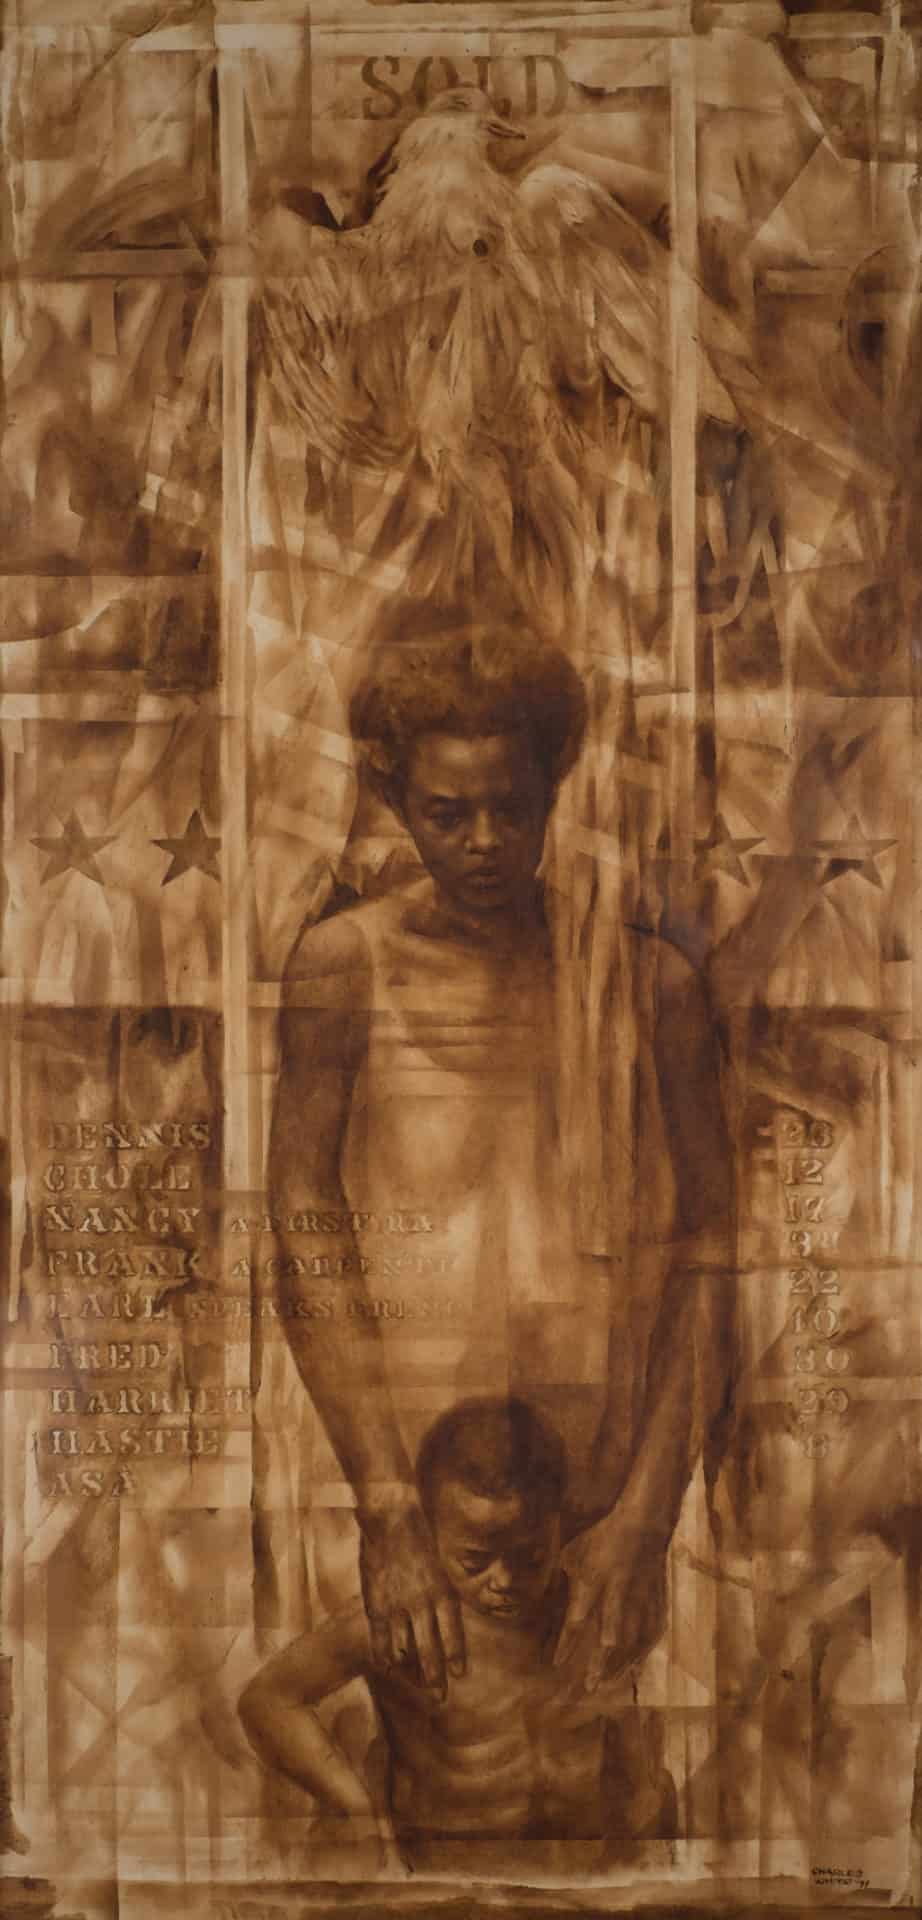 An enslaved woman stands on an auction block, holding her young son, fighting to keep him with her against the odds, in a painting in Charles White's 'Wanted' series. Press image courtesy of the Norman Rockwell Museum